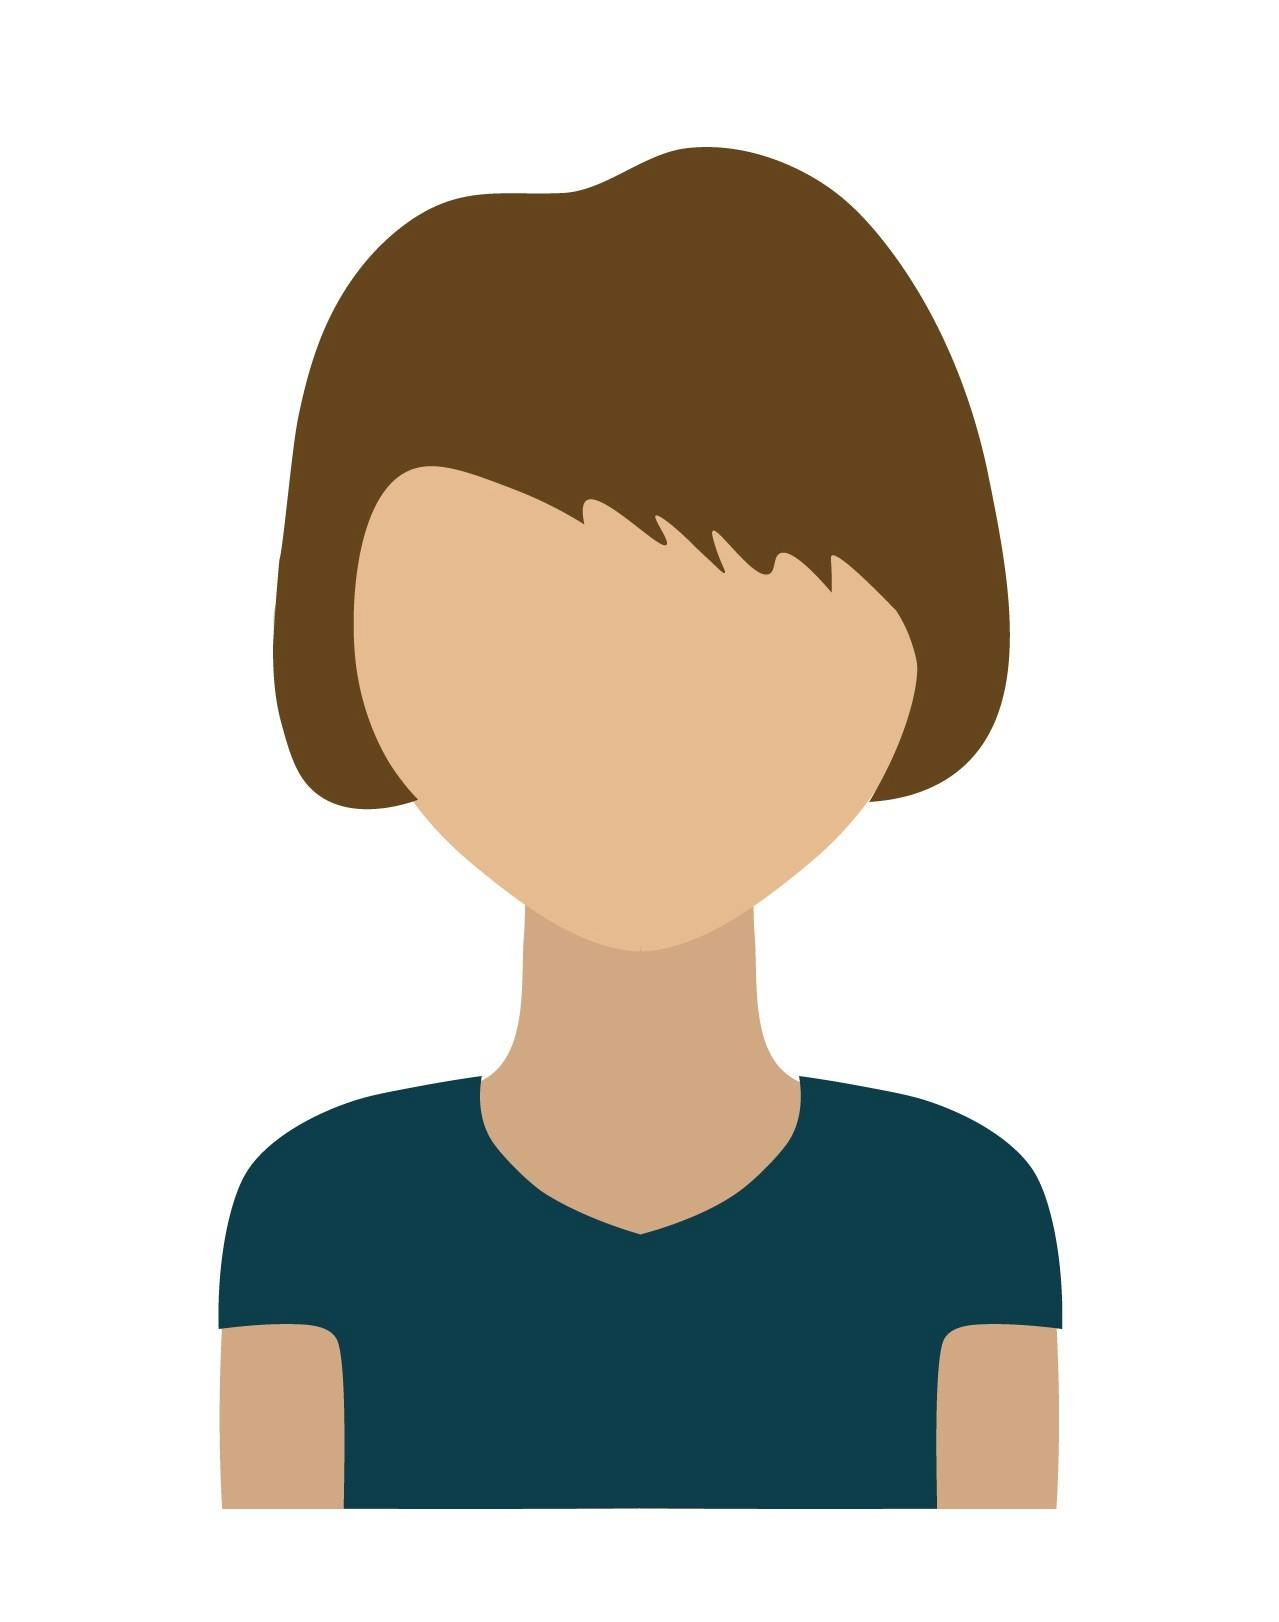 Drawing of a female profile with short brown hair, light brown skin tone, and a v-neck dark green t-shirt.